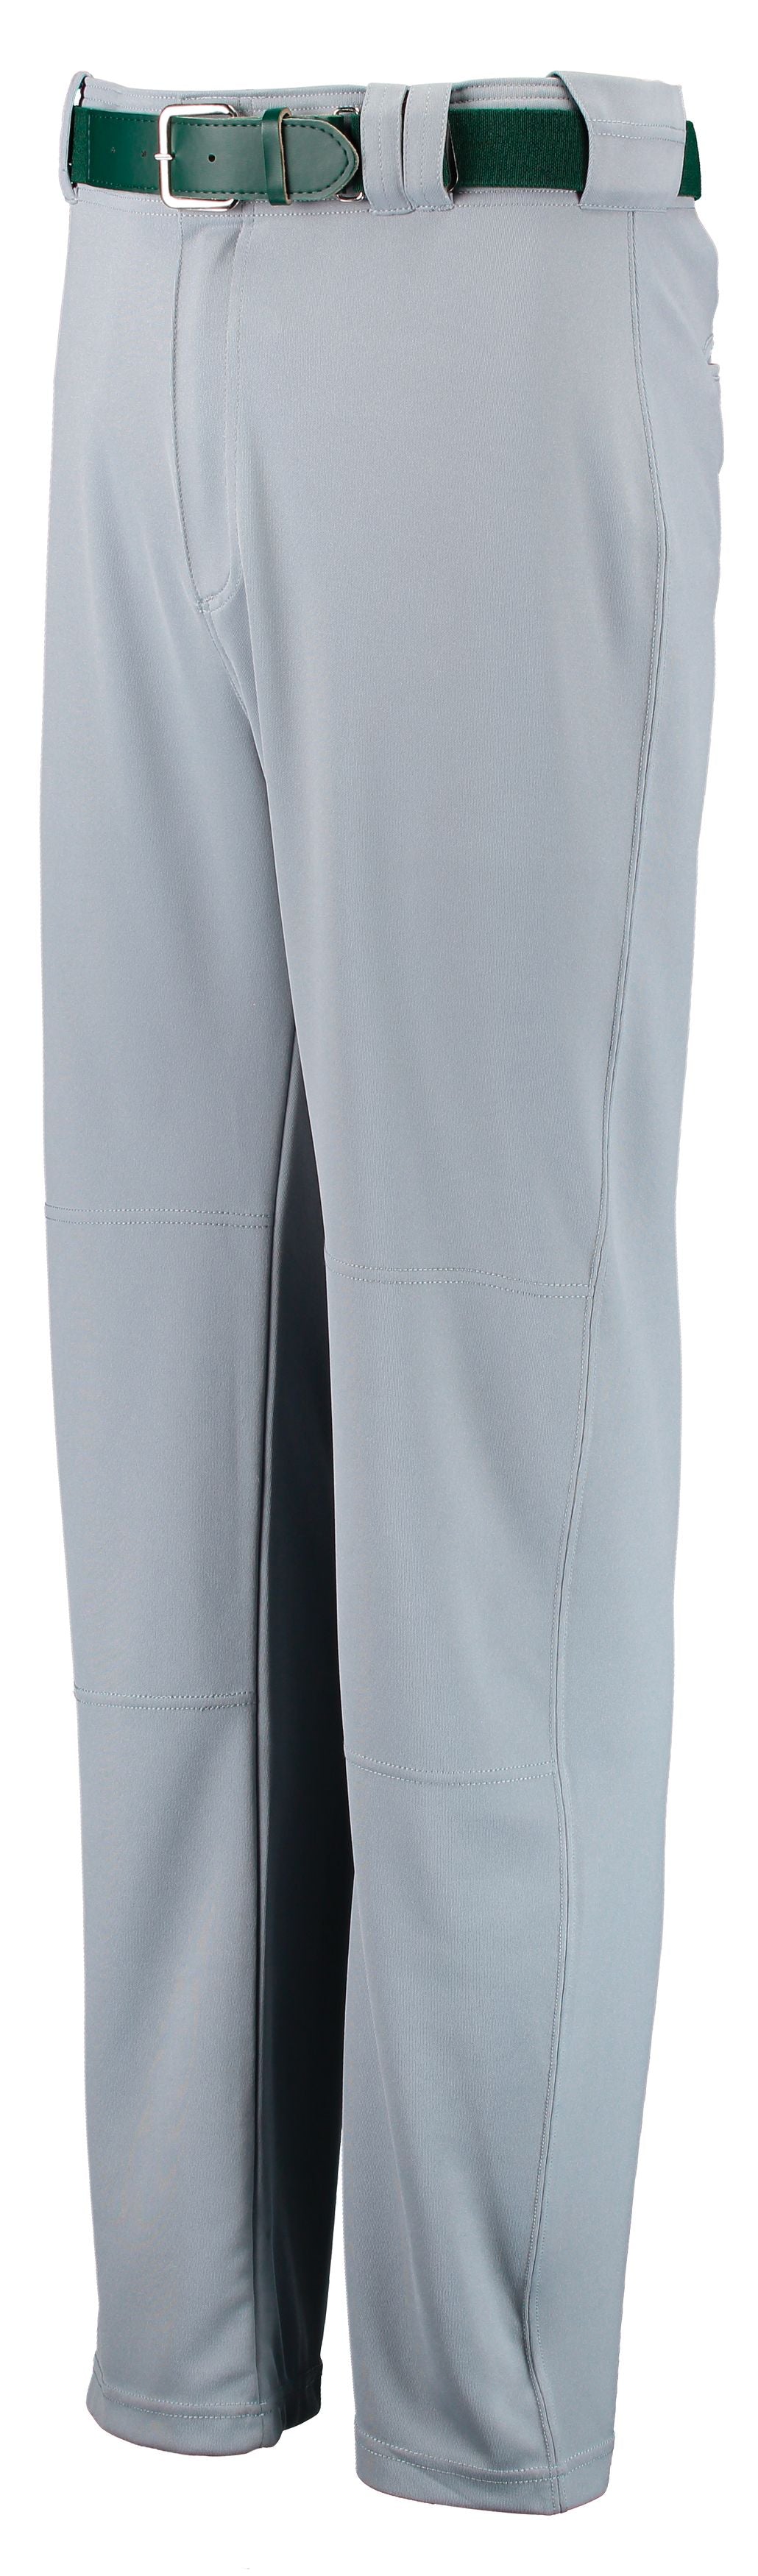 Russell Athletic Boot Cut Game Pant in Baseball Grey  -Part of the Adult, Adult-Pants, Pants, Baseball, Russell-Athletic-Products, All-Sports, All-Sports-1 product lines at KanaleyCreations.com